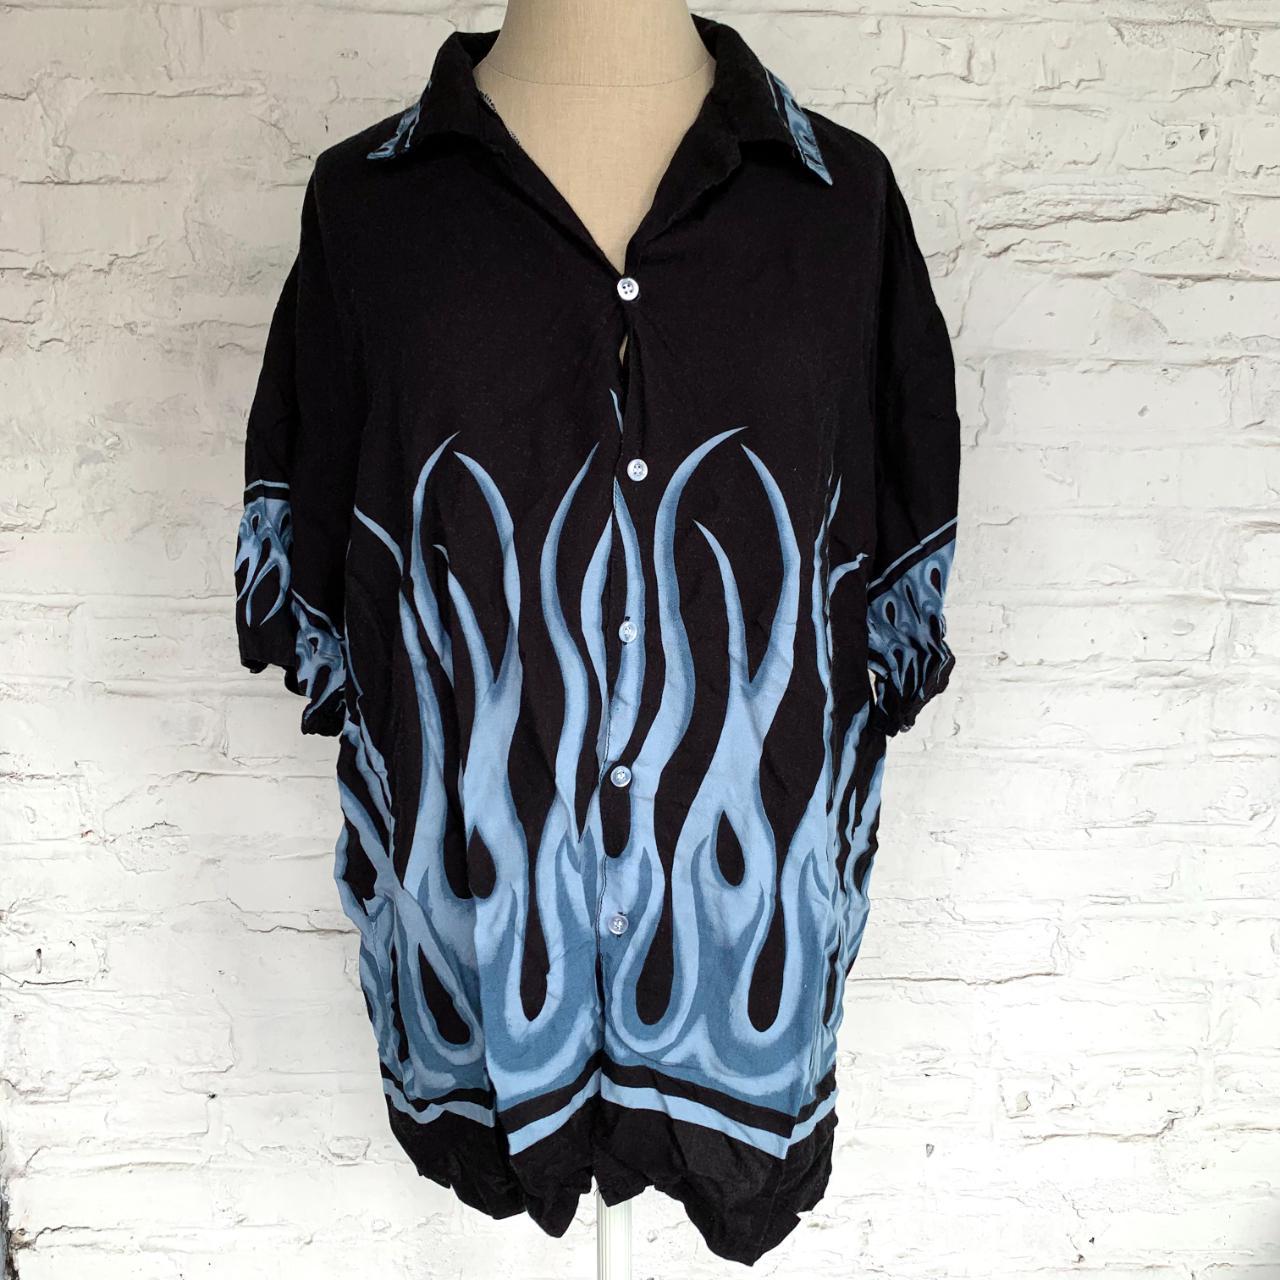 Product Image 1 - Flame shirt, black with blue